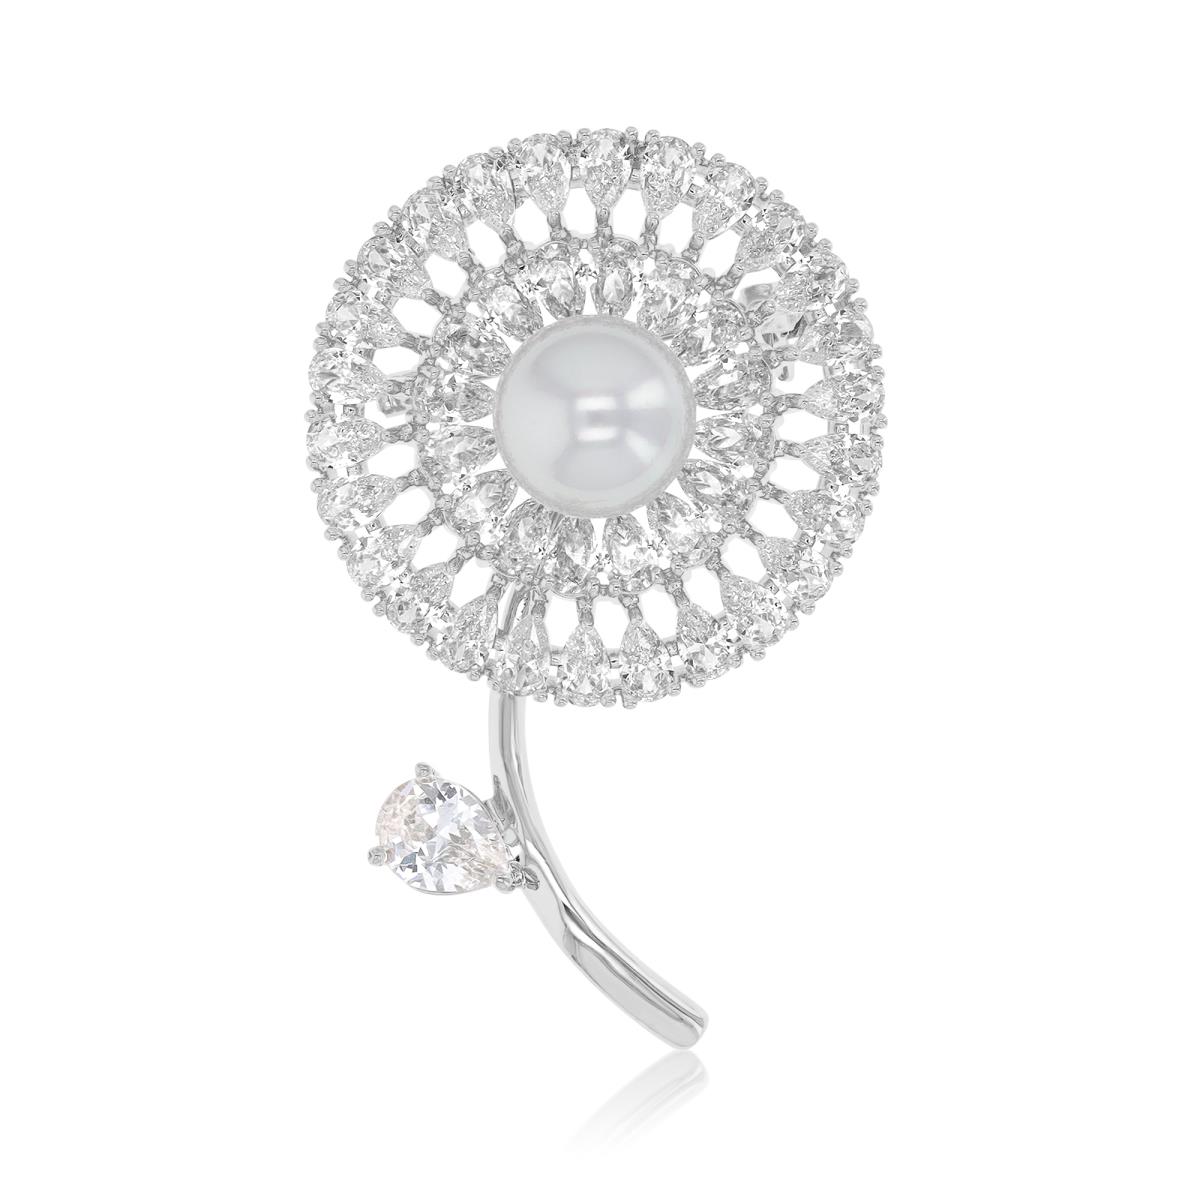 Brass White 32x46mm Pear Shaped White CZ & White Pearl Dandelion Pin Brooch With Safety Lock